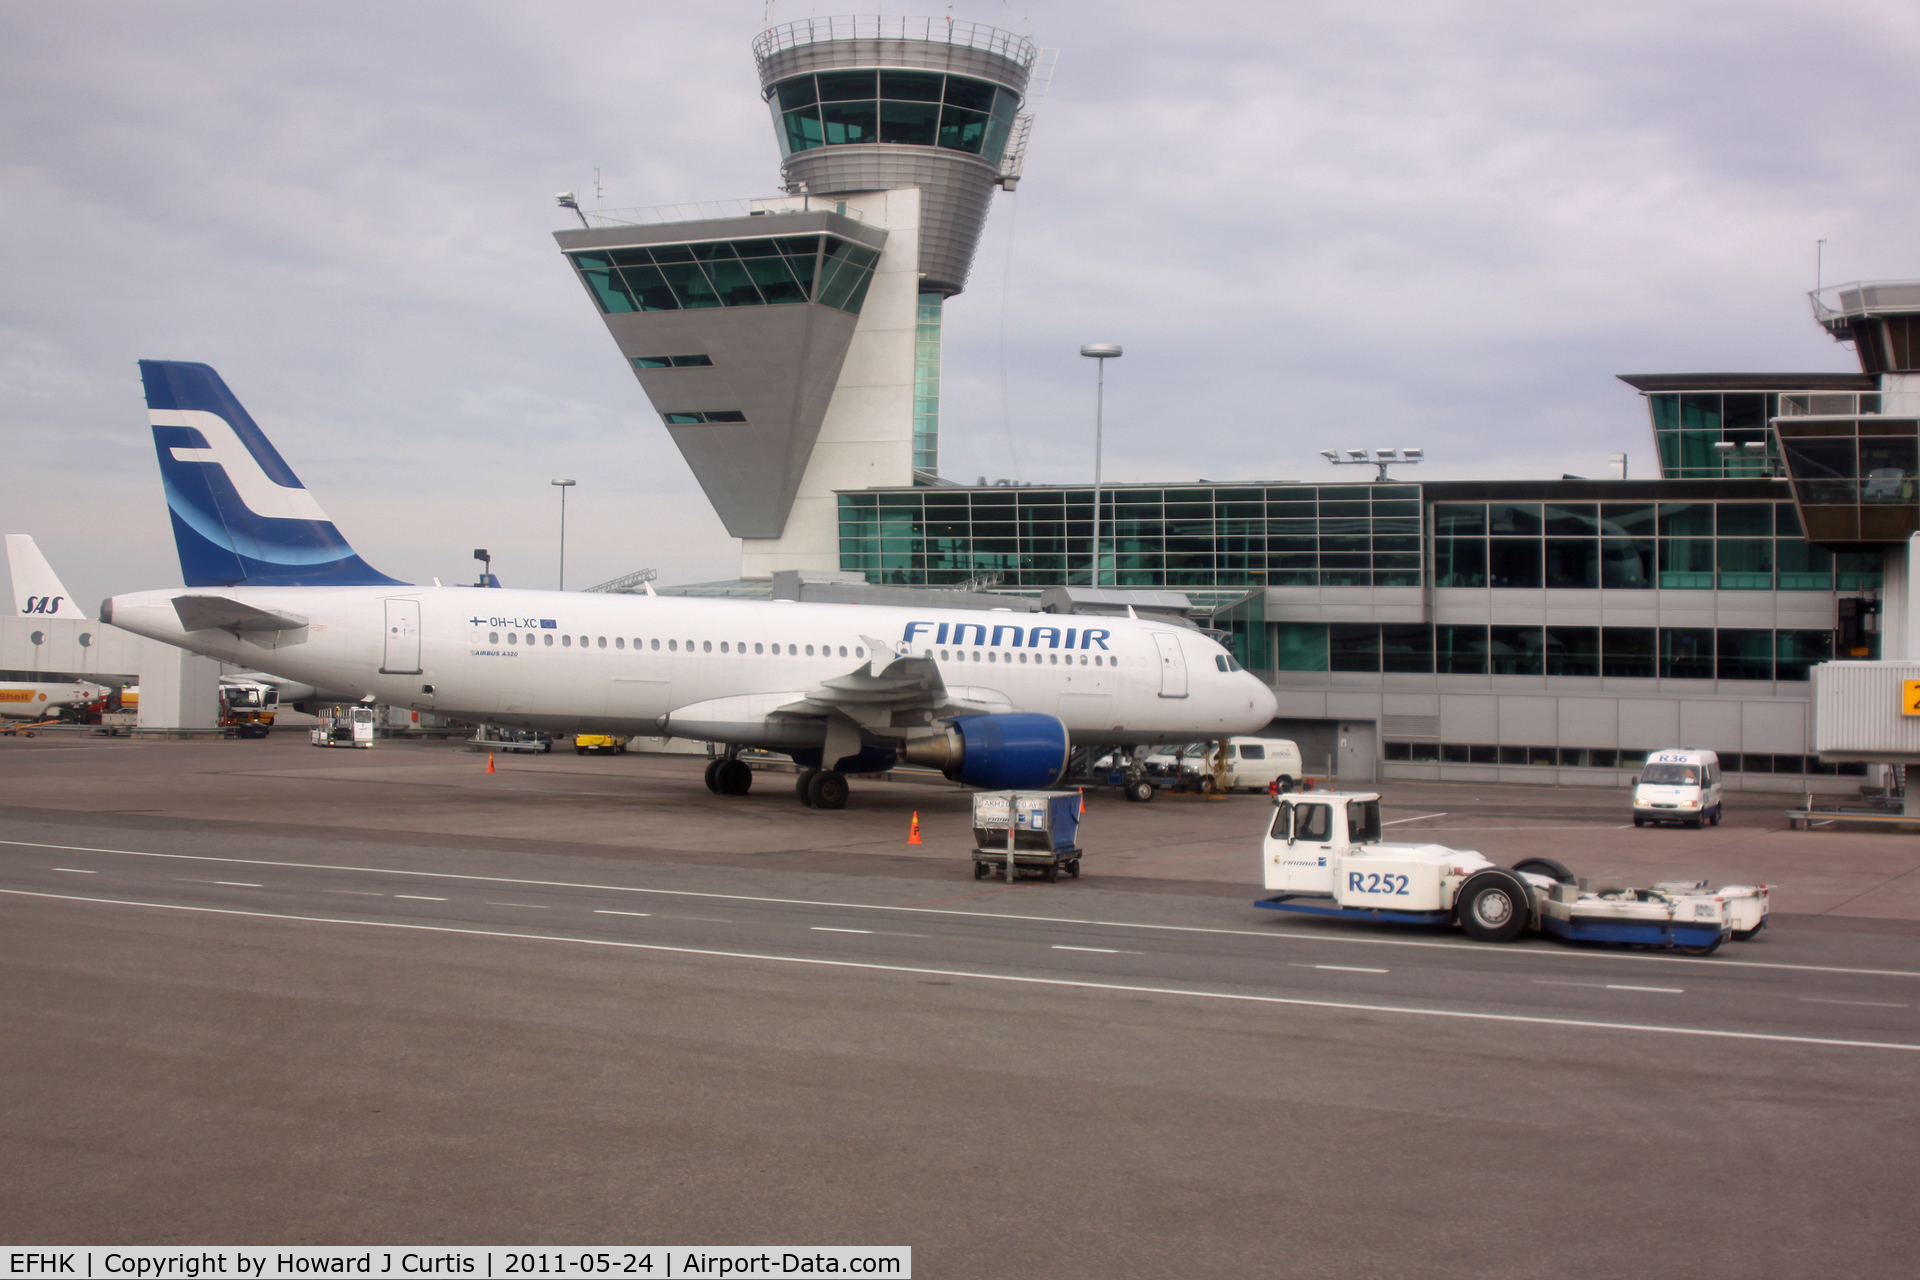 Helsinki-Vantaa Airport, Vantaa Finland (EFHK) - View of the control tower and part of the superb L-shaped terminal here.